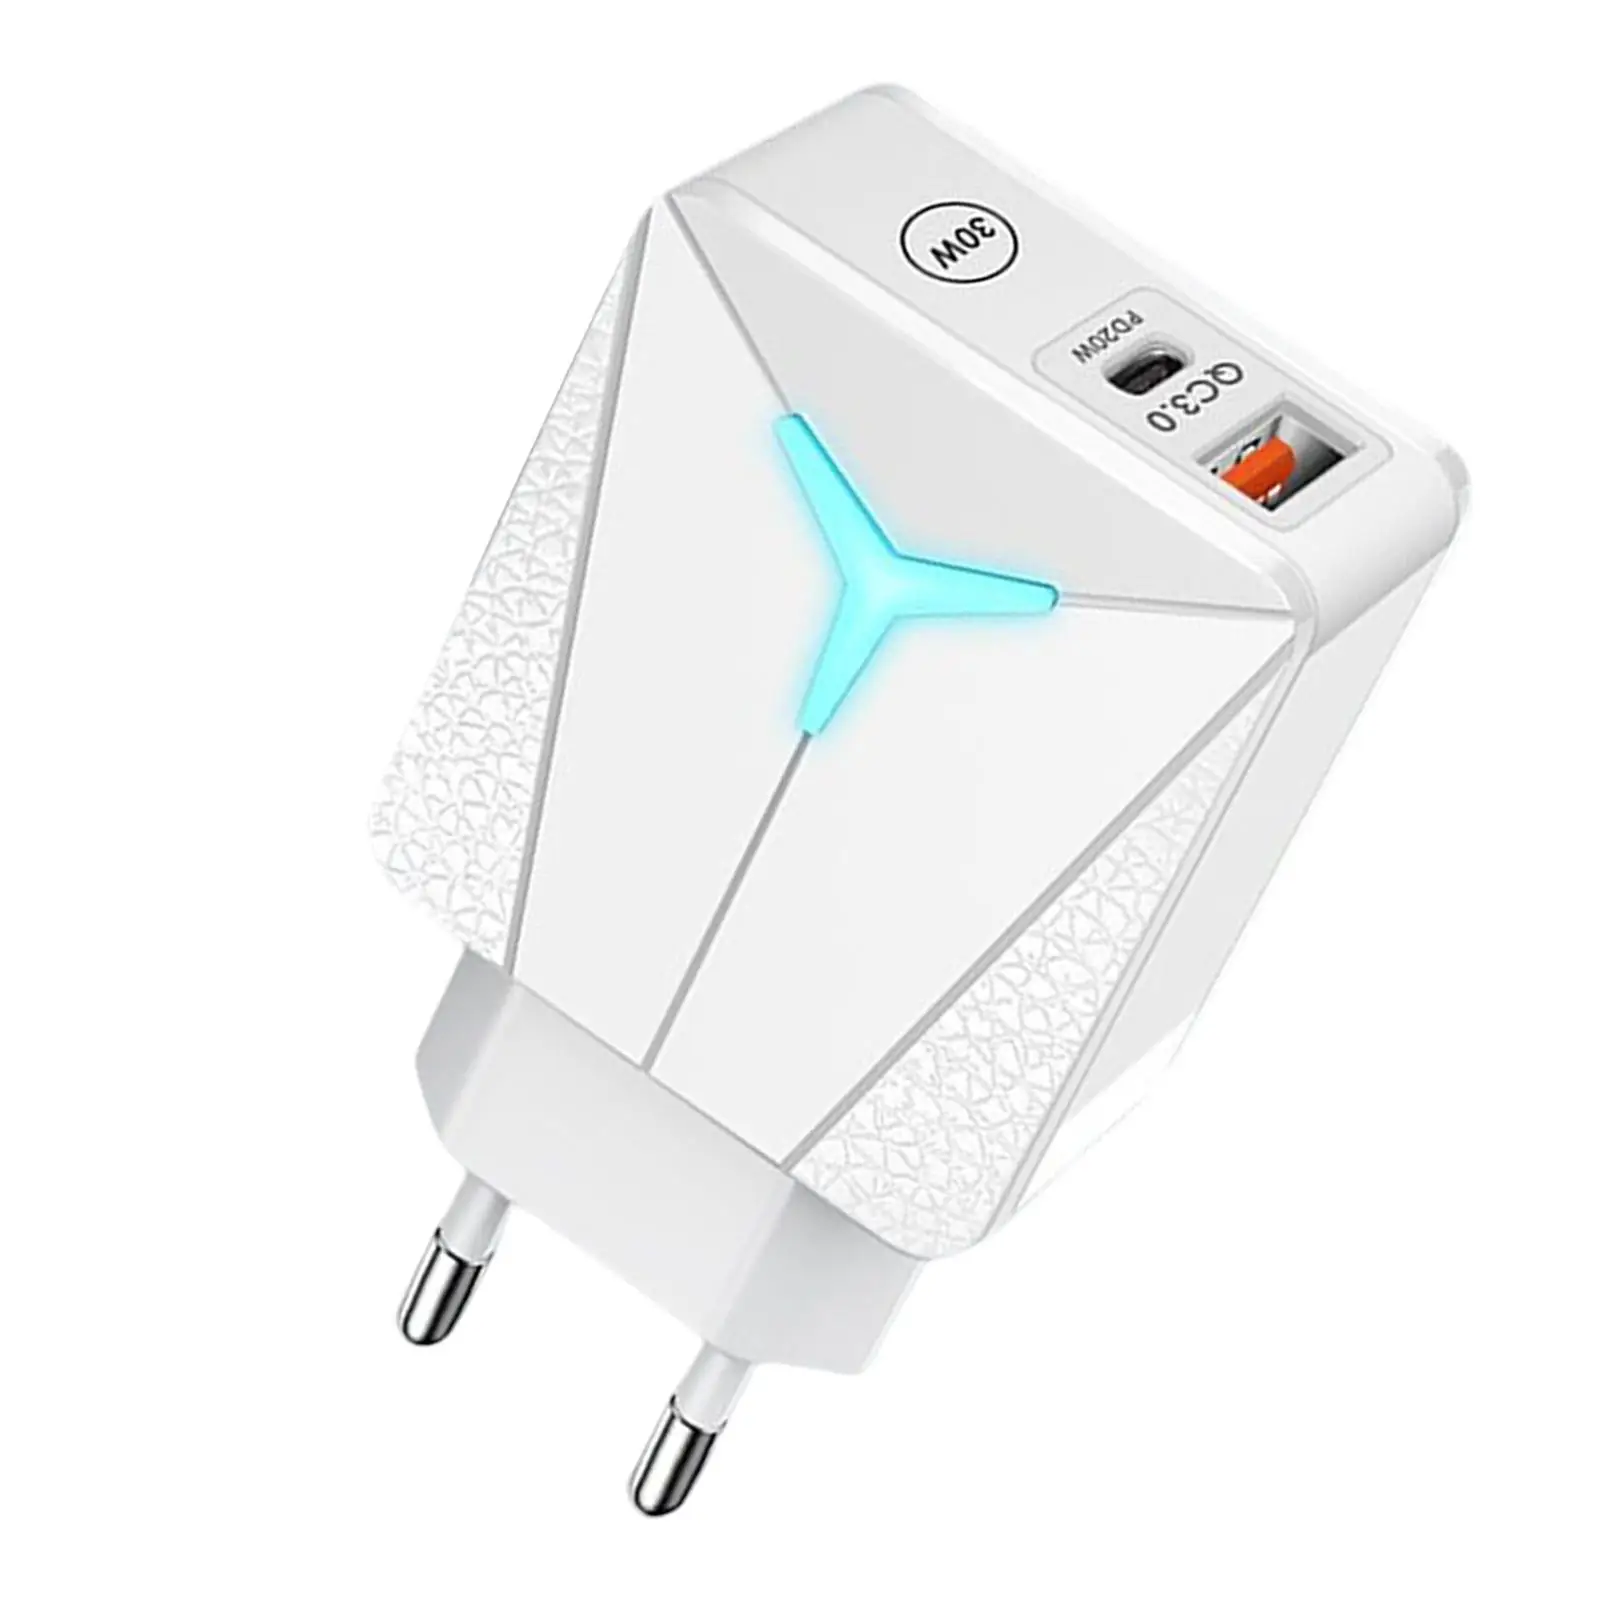 Phone Charger Plug Compact Fast Charging Dual Port PD 20W QC3.0 Converter USB Charging Block Wall Charger for Home Use Travel